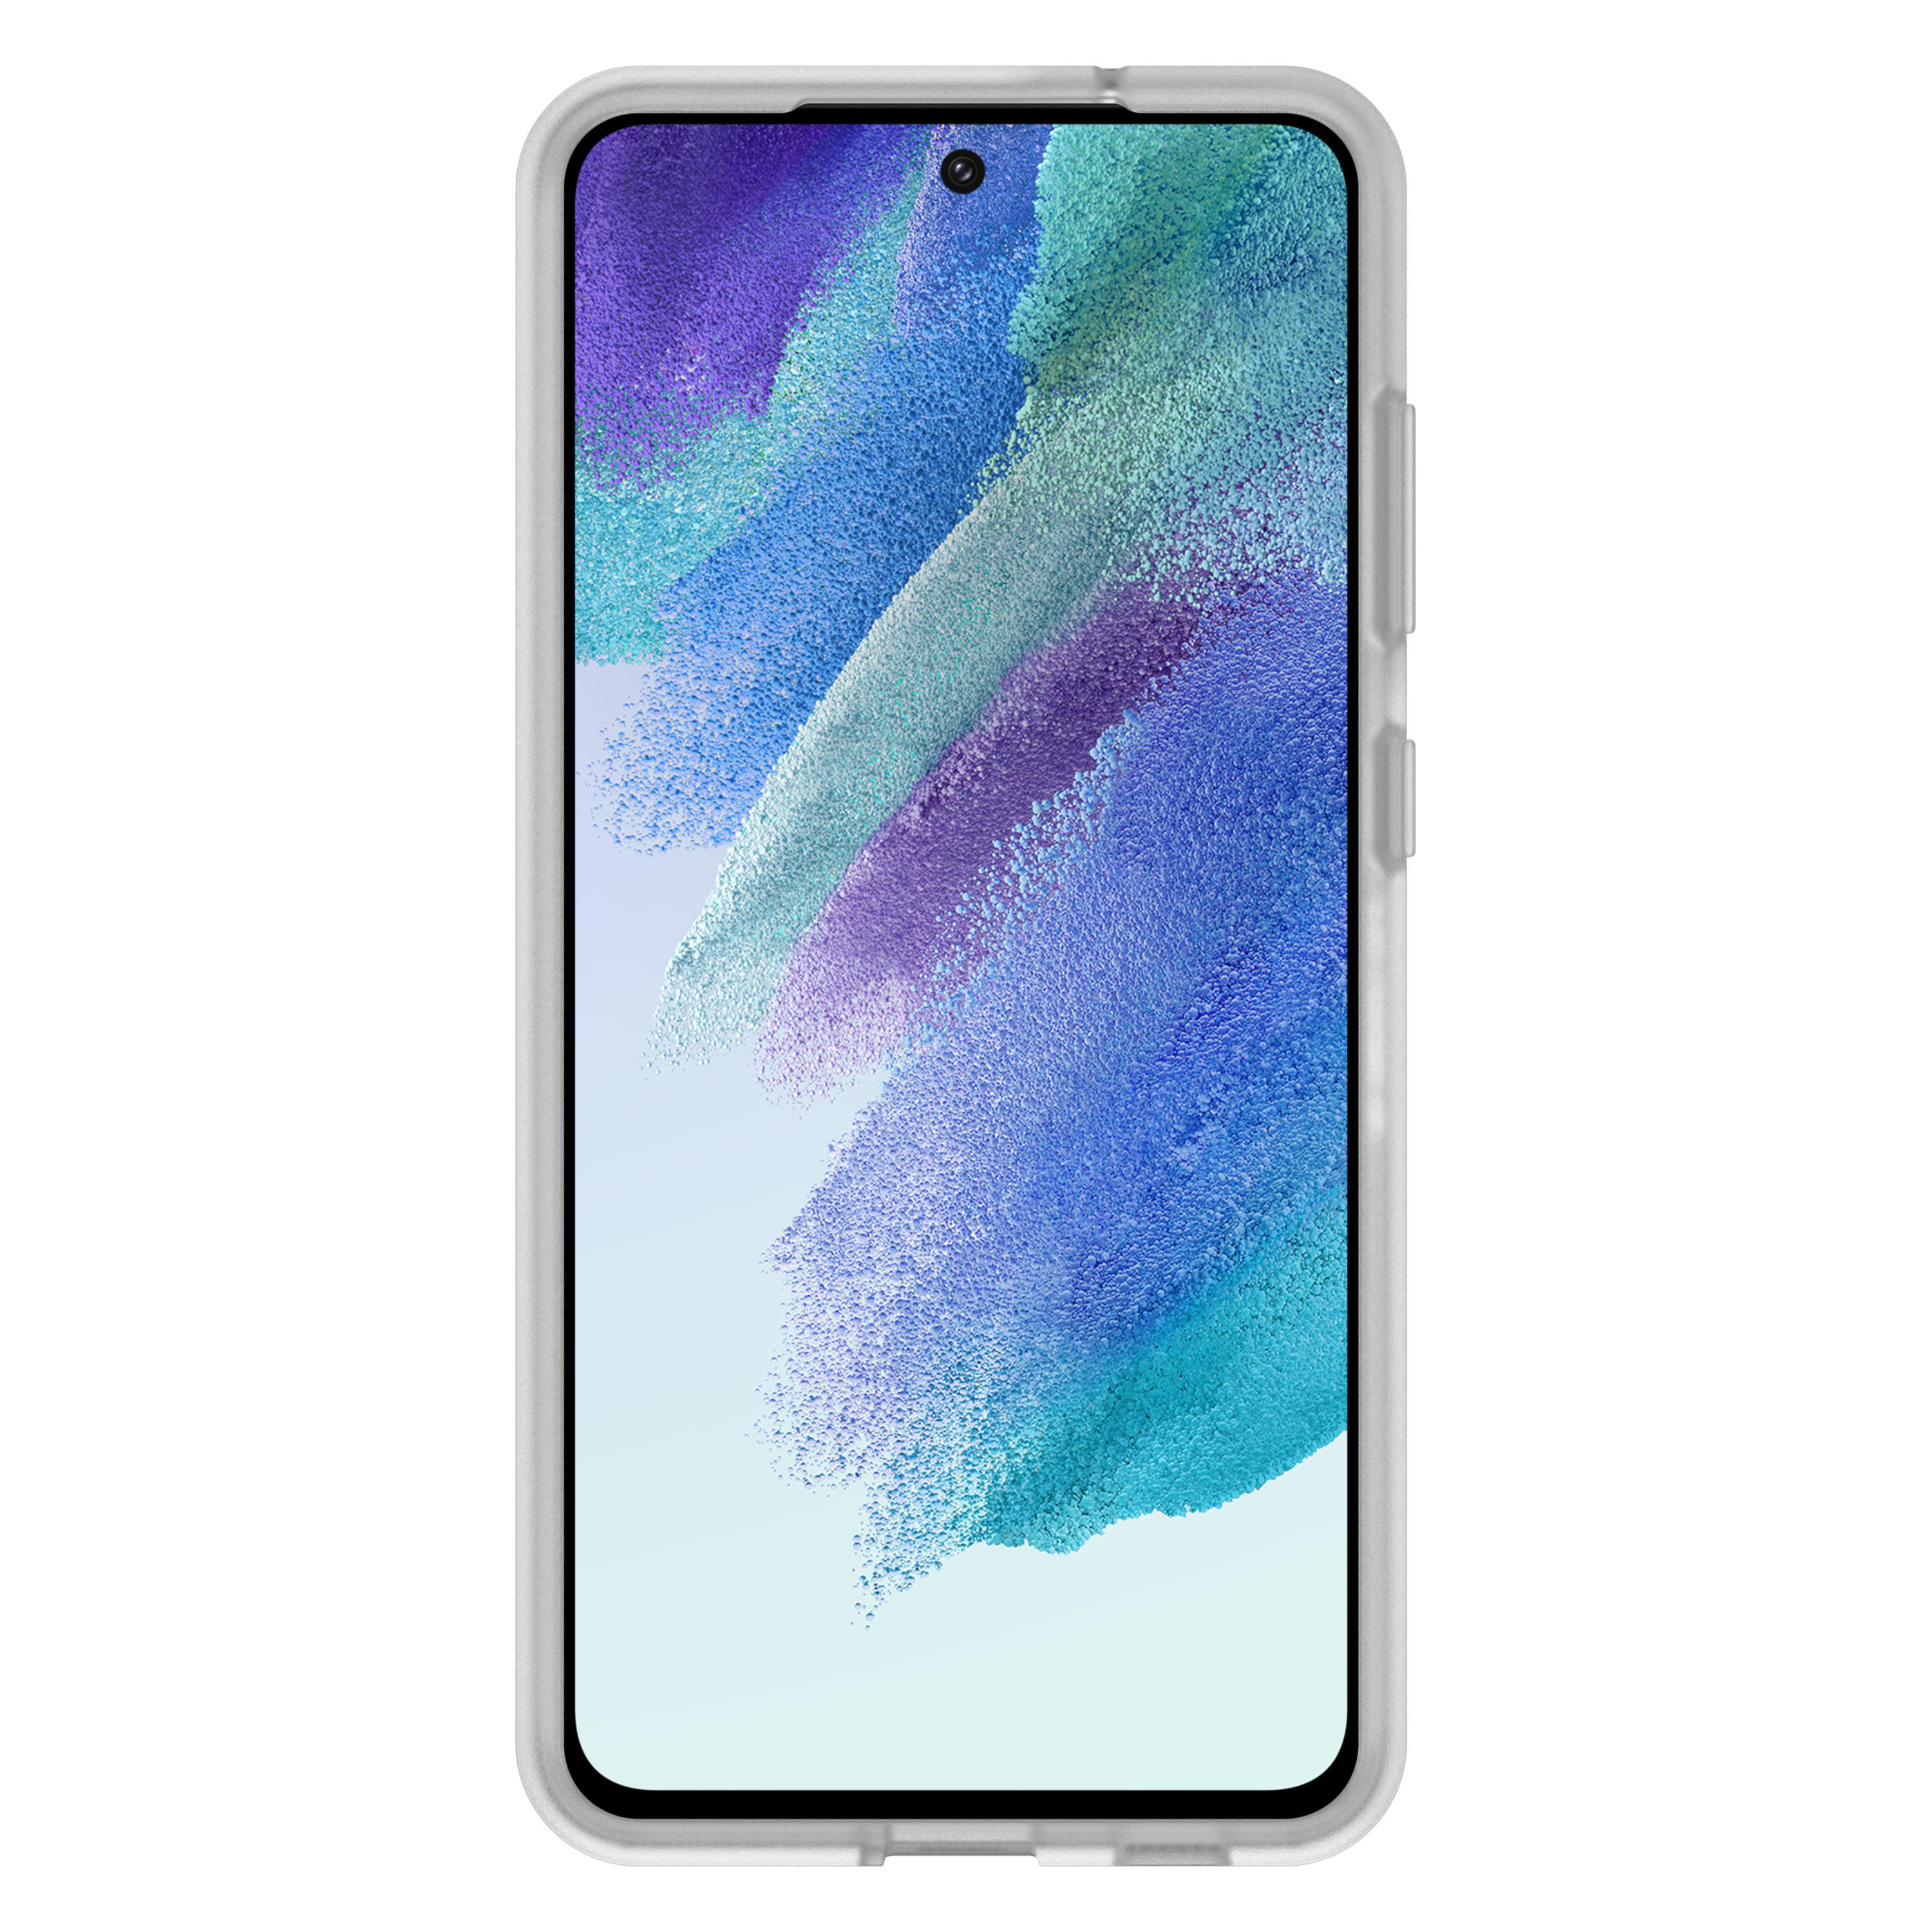 Backcover, FE S21 OTTERBOX 5G, Transparent REACT, 77-83953 Galaxy Samsung,